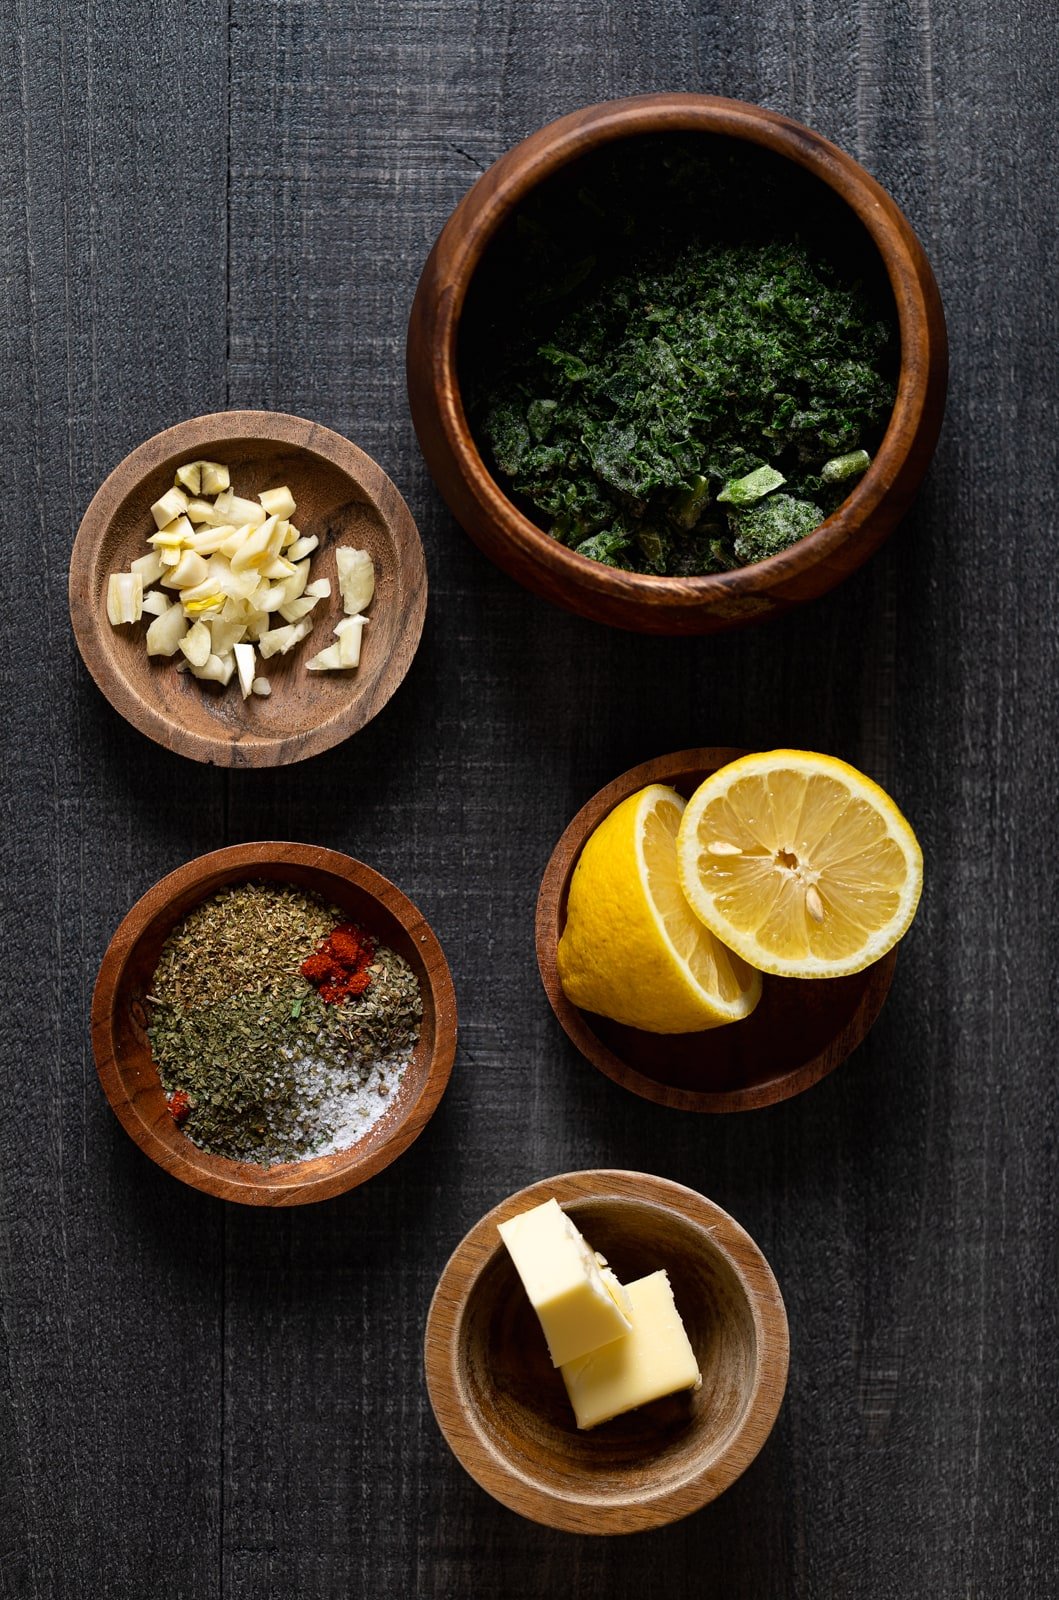 Wooden bowls of ingredients for Creamy Lemon and Herb Parmesan Chicken including garlic, lemon, and butter